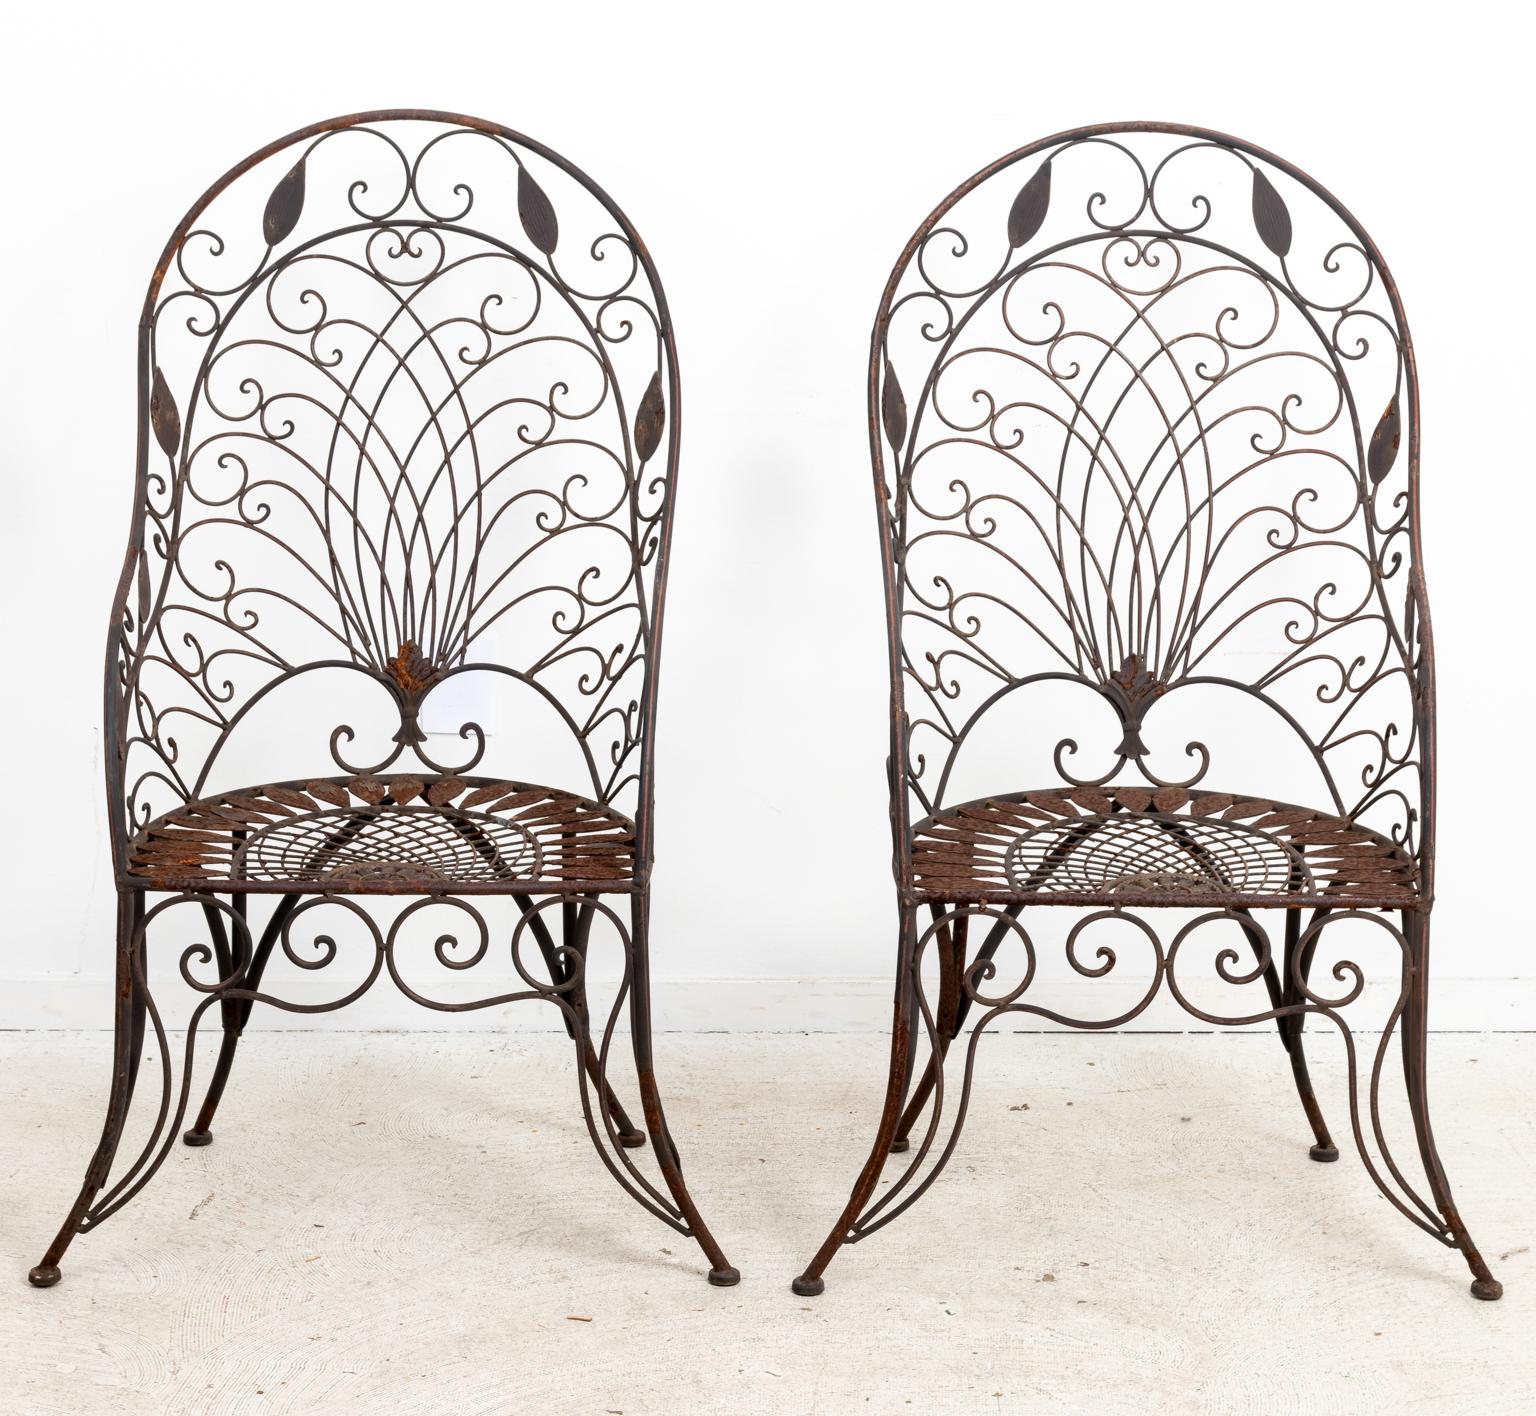 Pair of Wrought Iron Curved Back Garden Chairs with Scrollwork 4